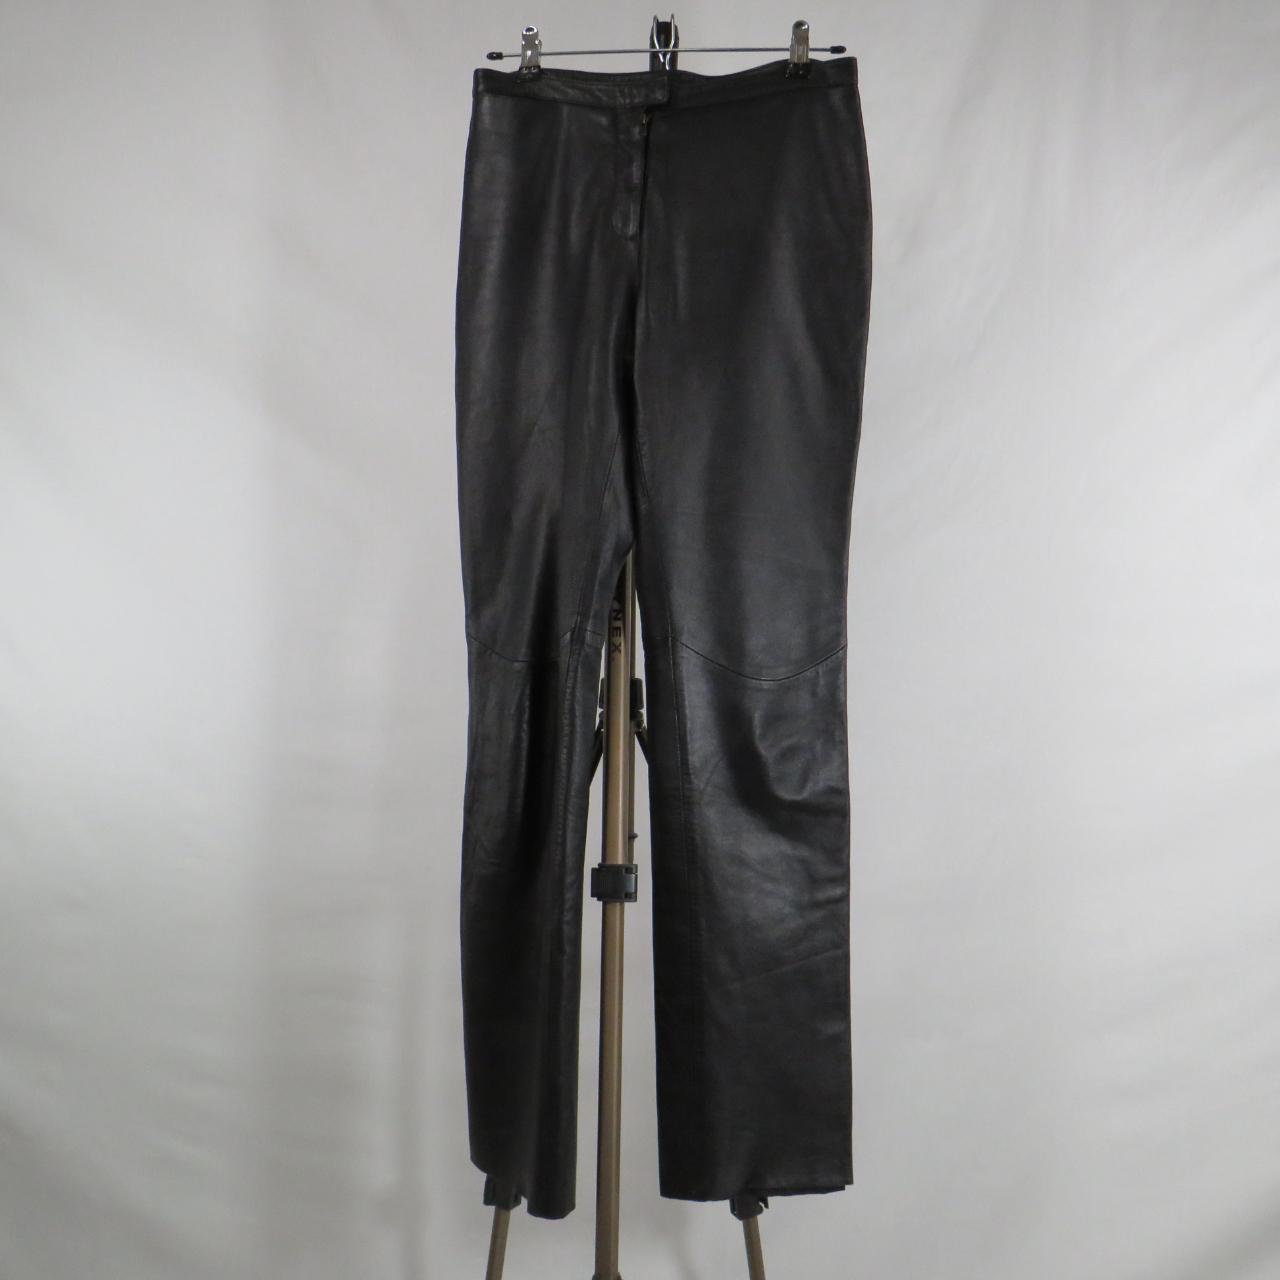 Express Italian lambskin mid-rise pants with 1 front... - Depop